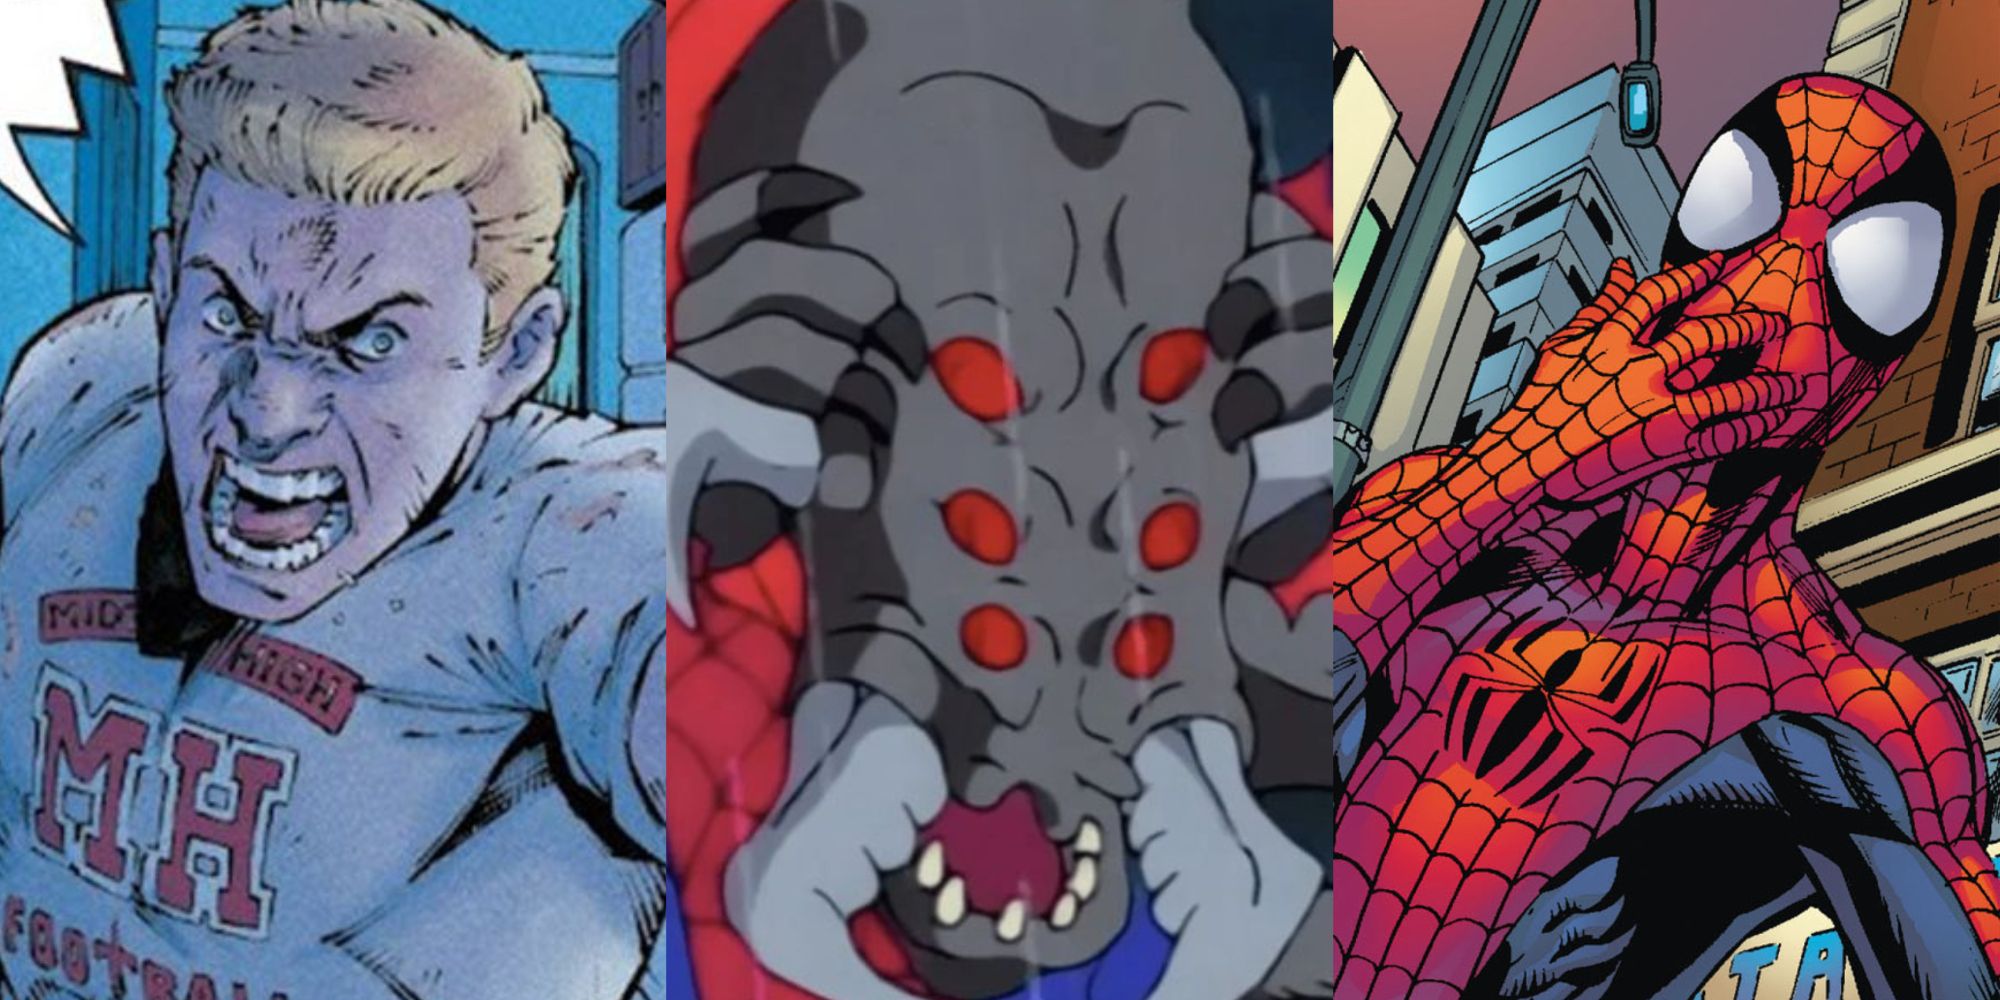 Split image of Flash Thompson, Man-Spider, and Spider-Man from Spider-Man media.-1